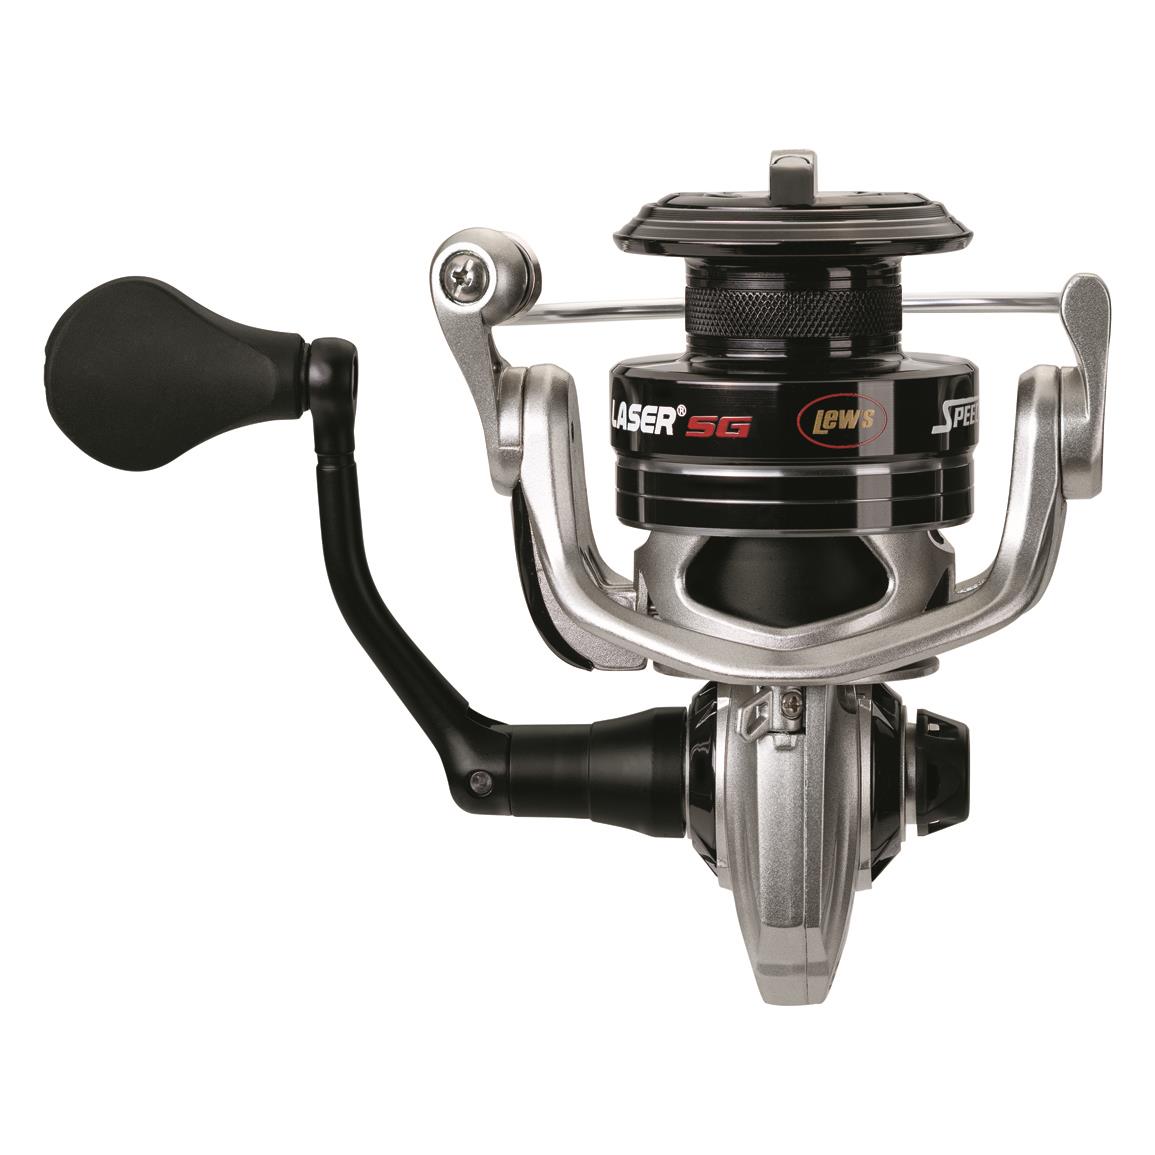 Mr. Crappie Crappie Thunder Pre-spooled Solo Jigging Reel - 732868,  Spinning Reels at Sportsman's Guide